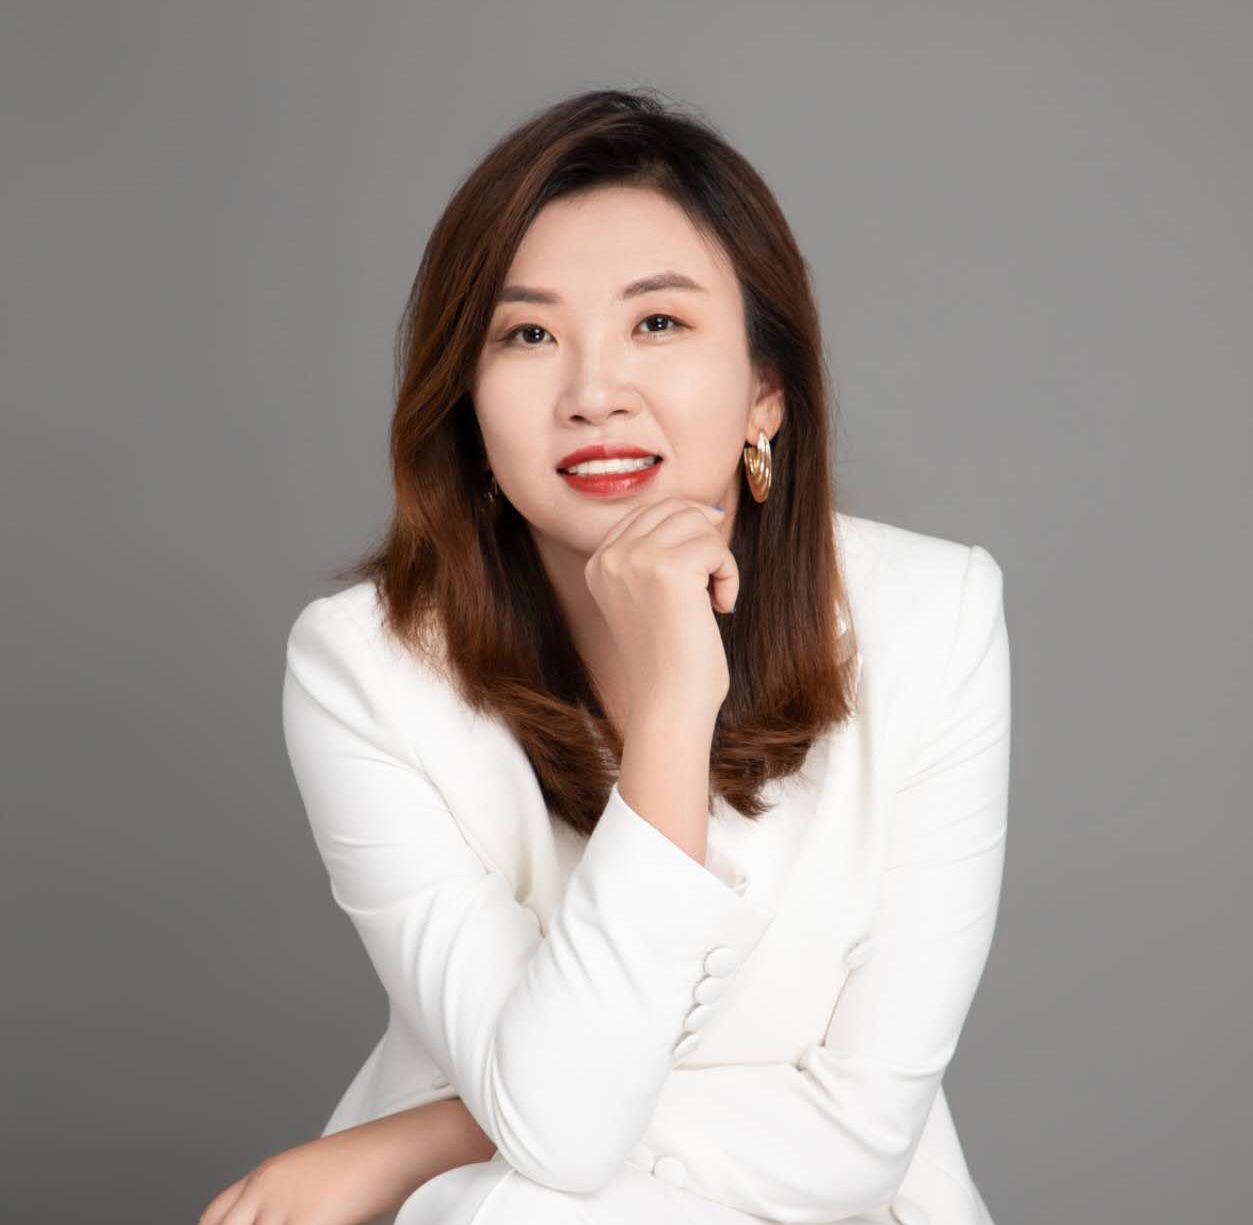 2023 is a tough year for biotech IPOs in HK, says Ascendum Capital’s Serena Shao